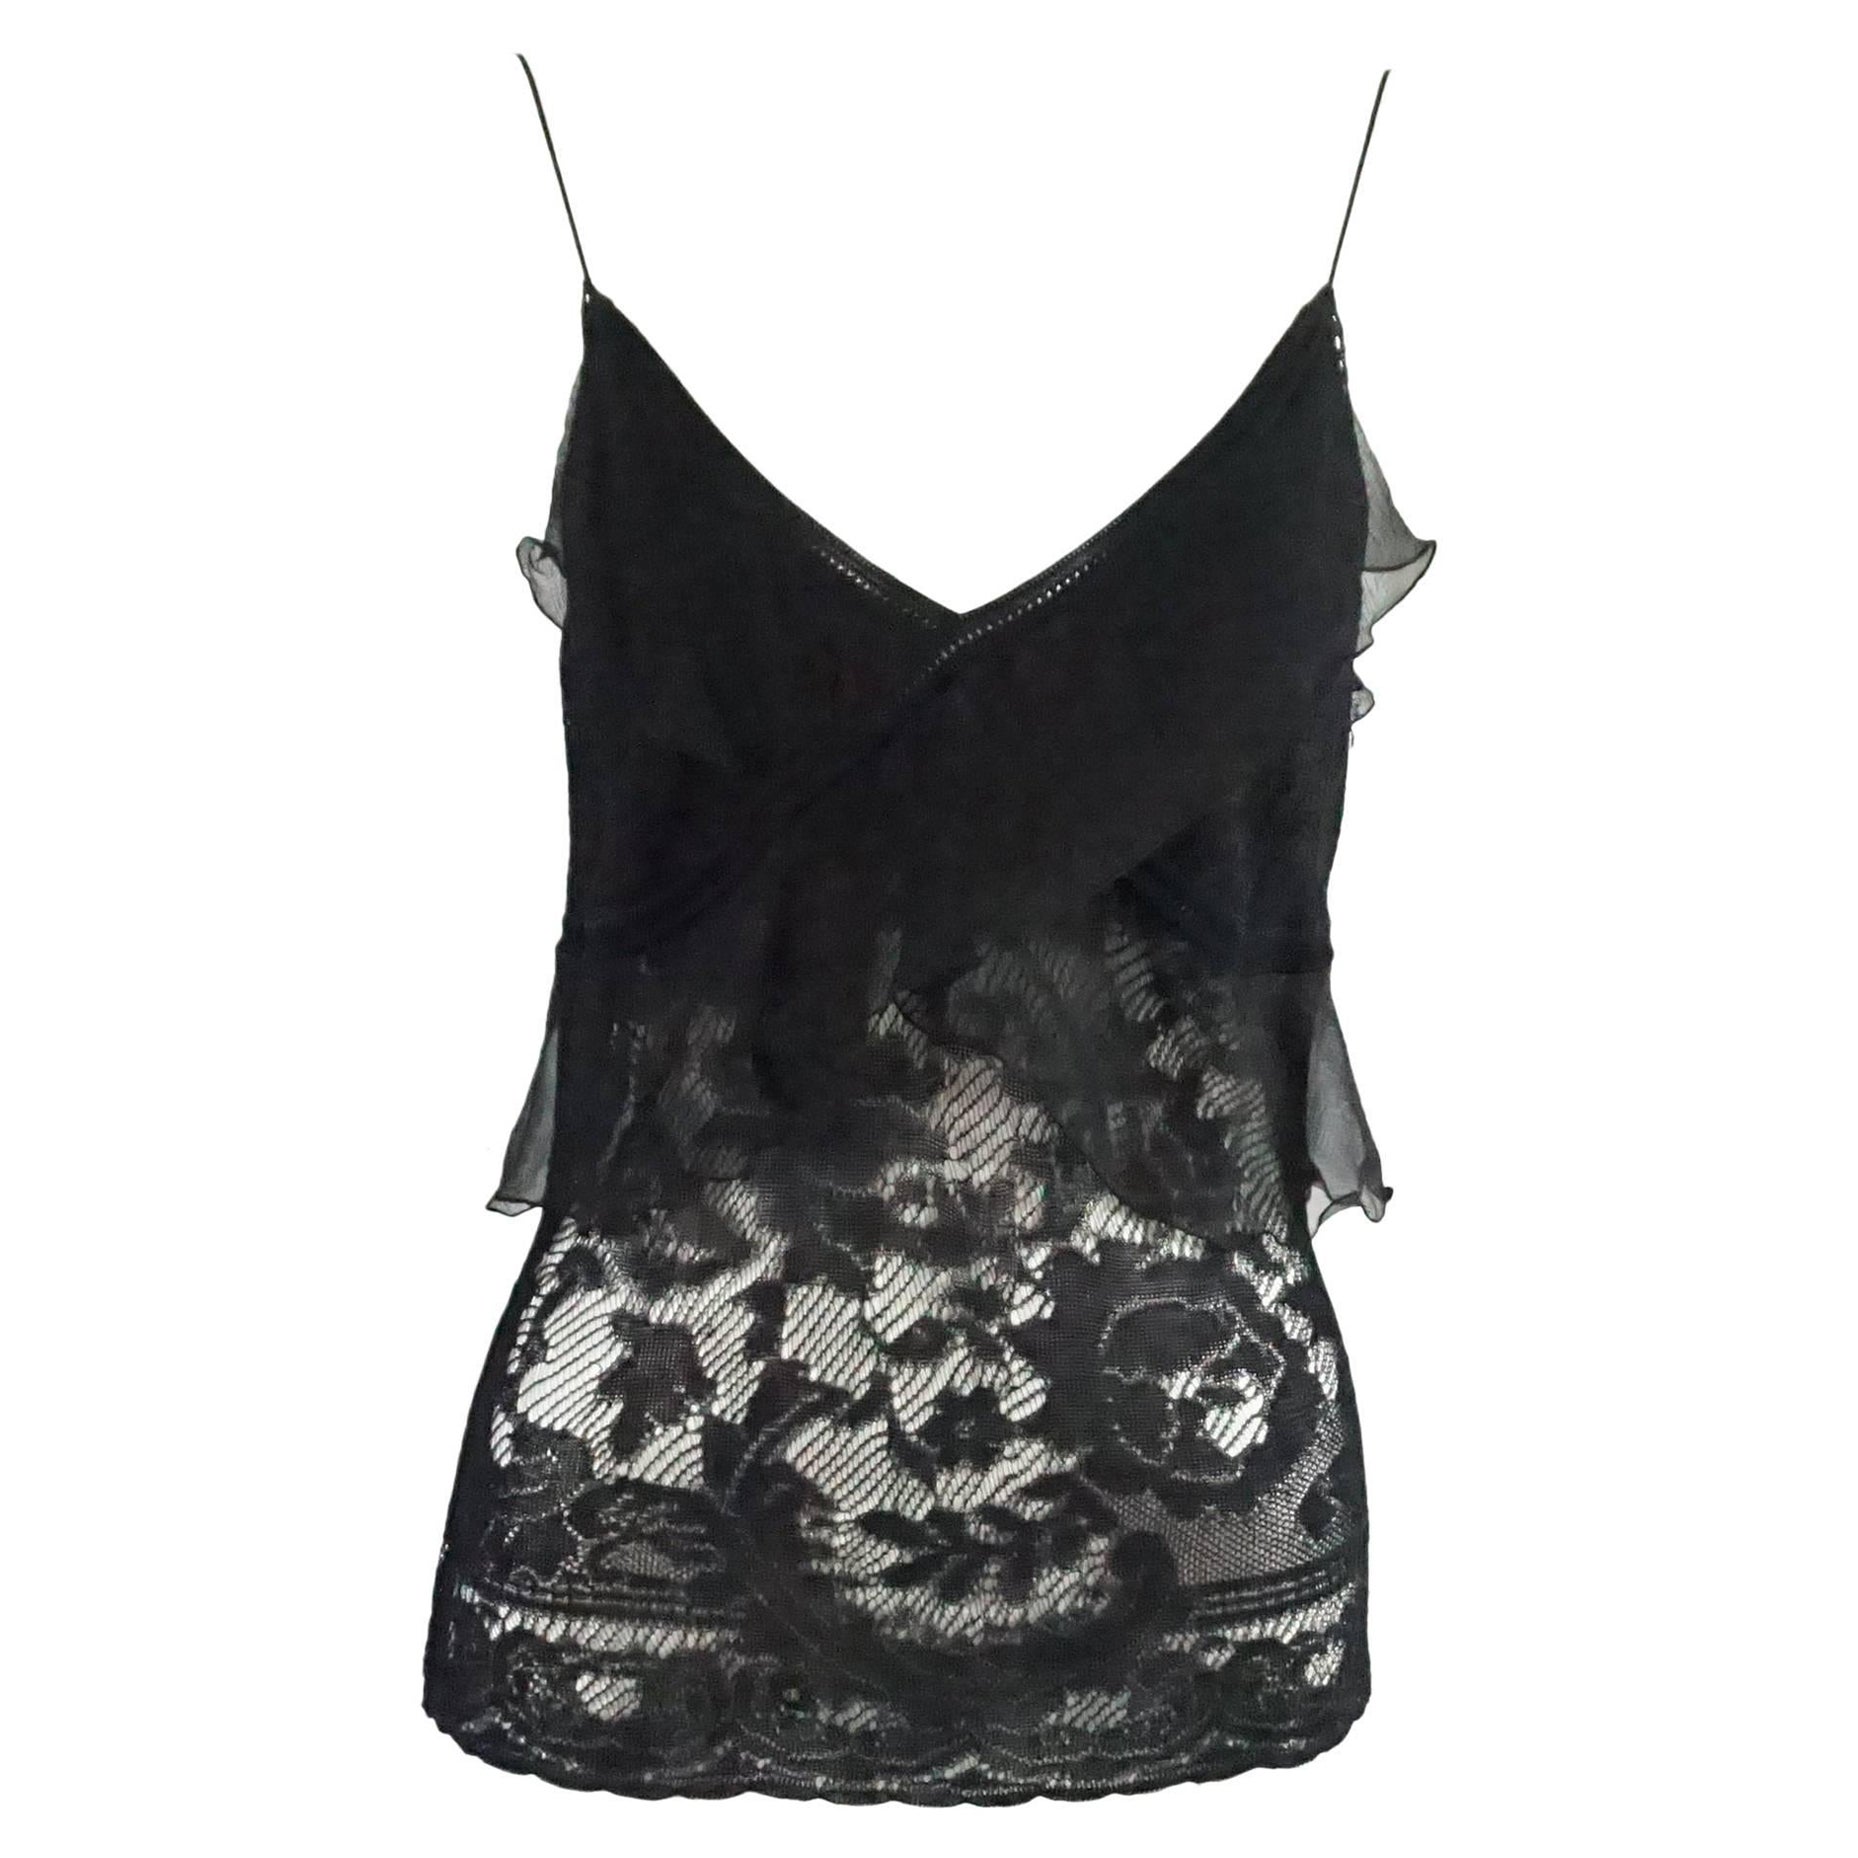 Christian Dior Black Lace Camisole Top - French 40 